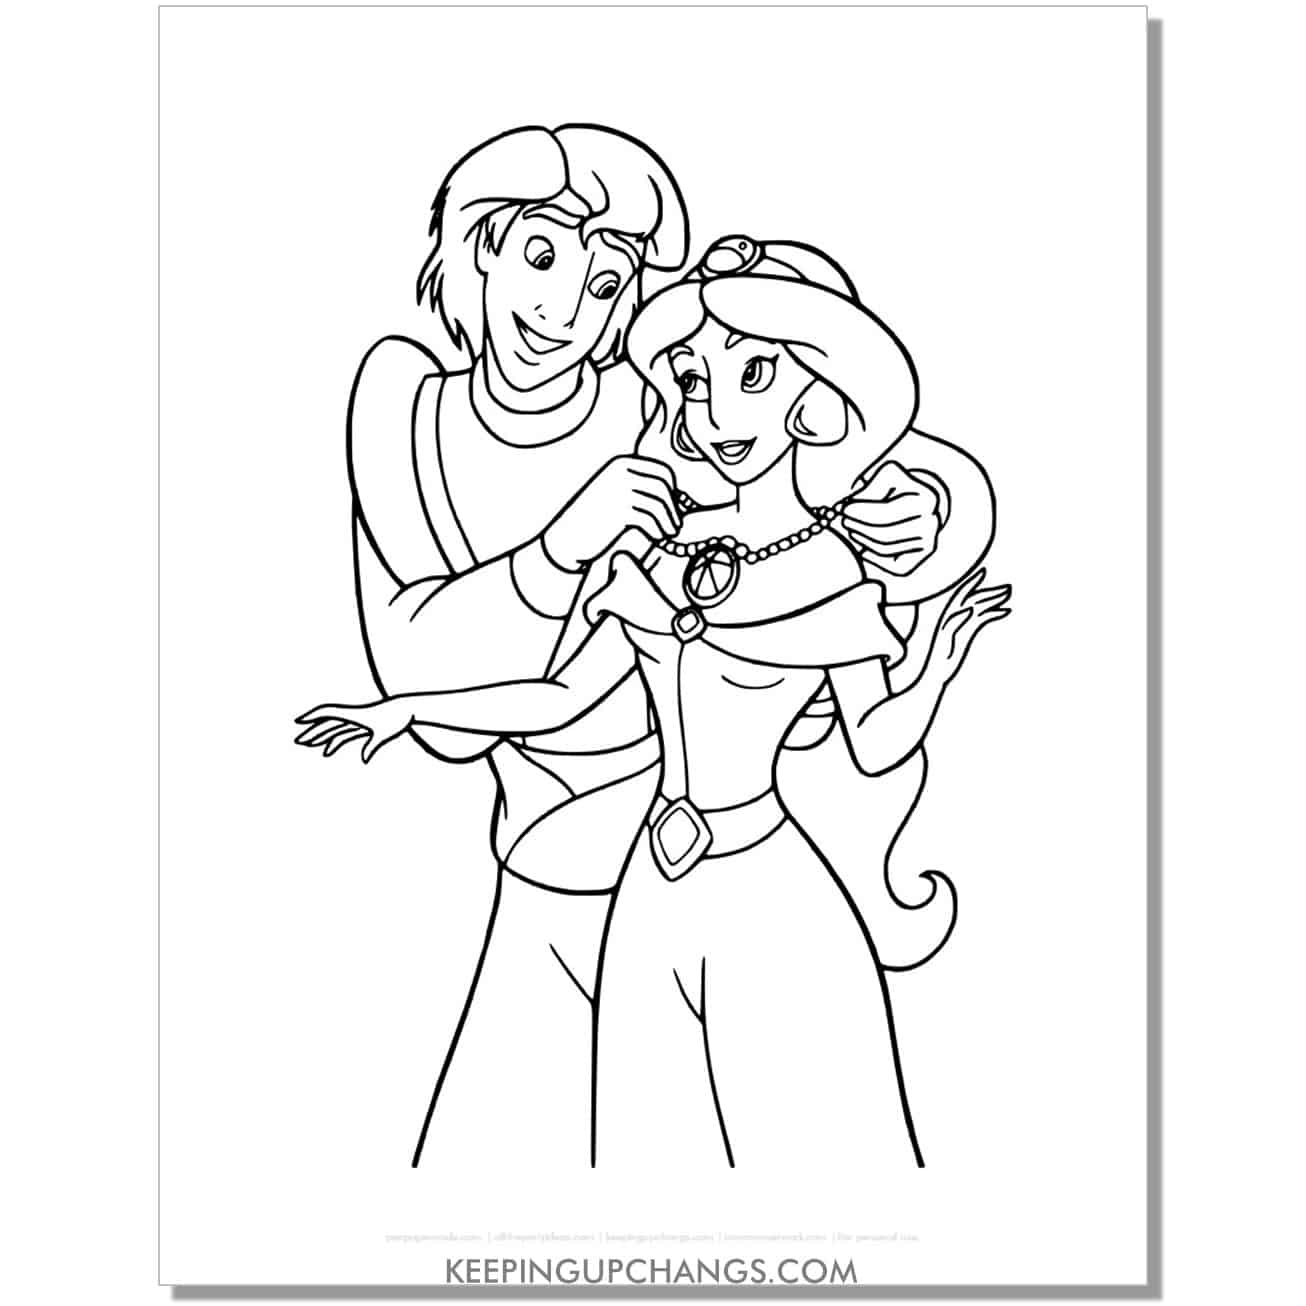 jasmine getting necklace from aladdin coloring page, sheet.